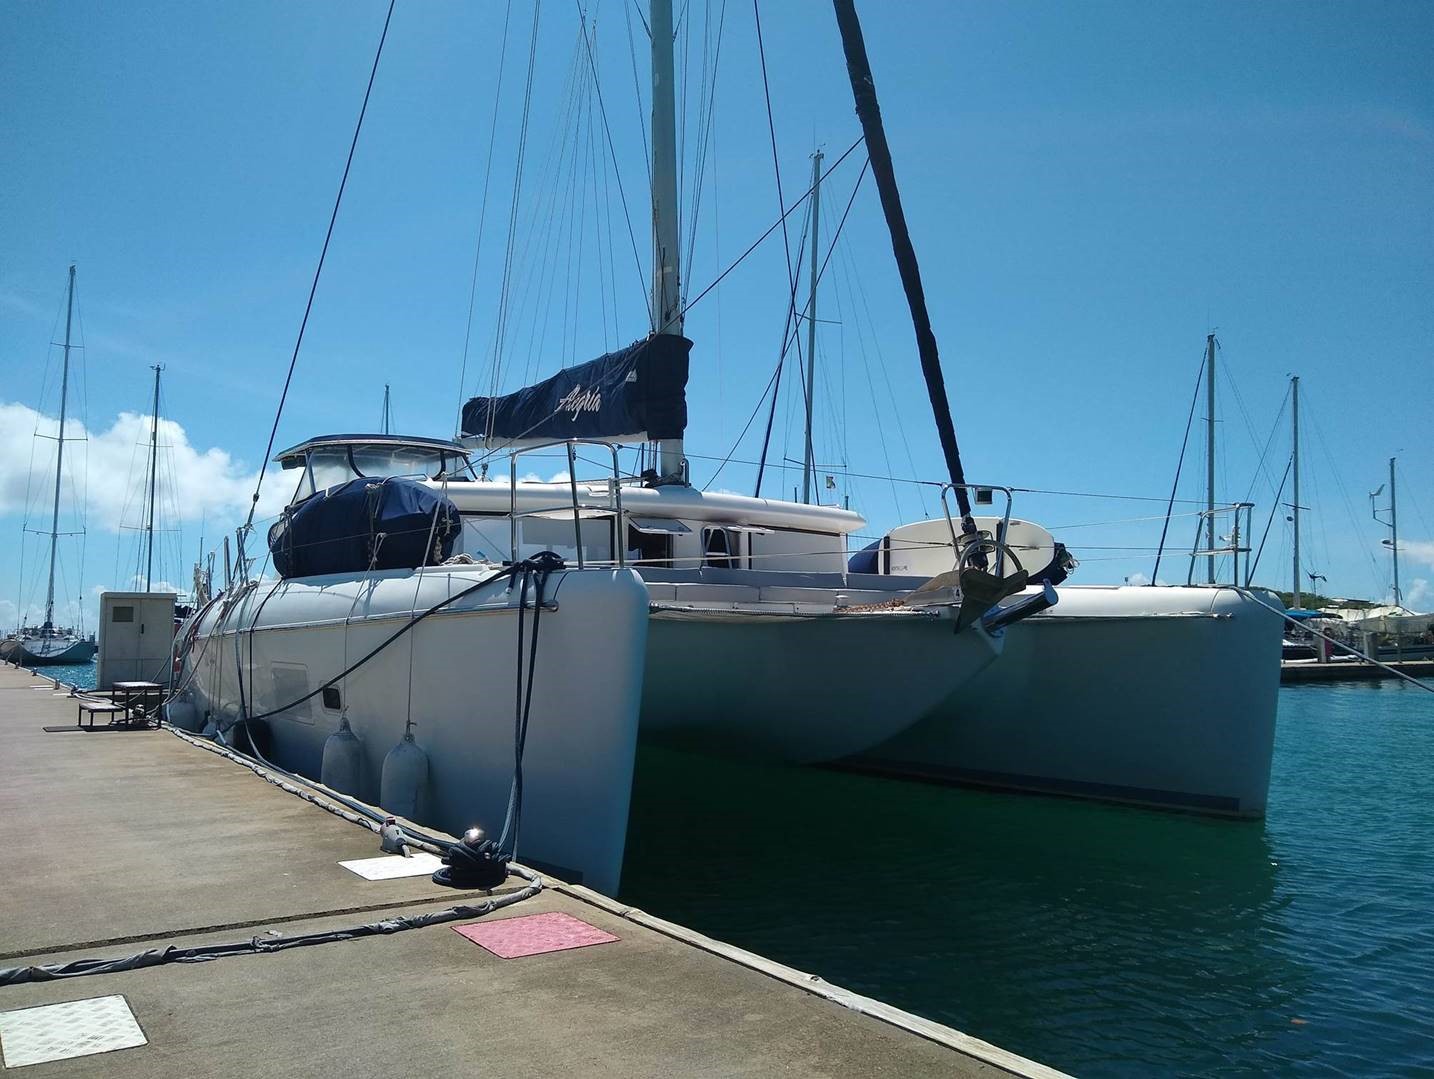 Used Sail  for Sale 2010 Lagoon 421 